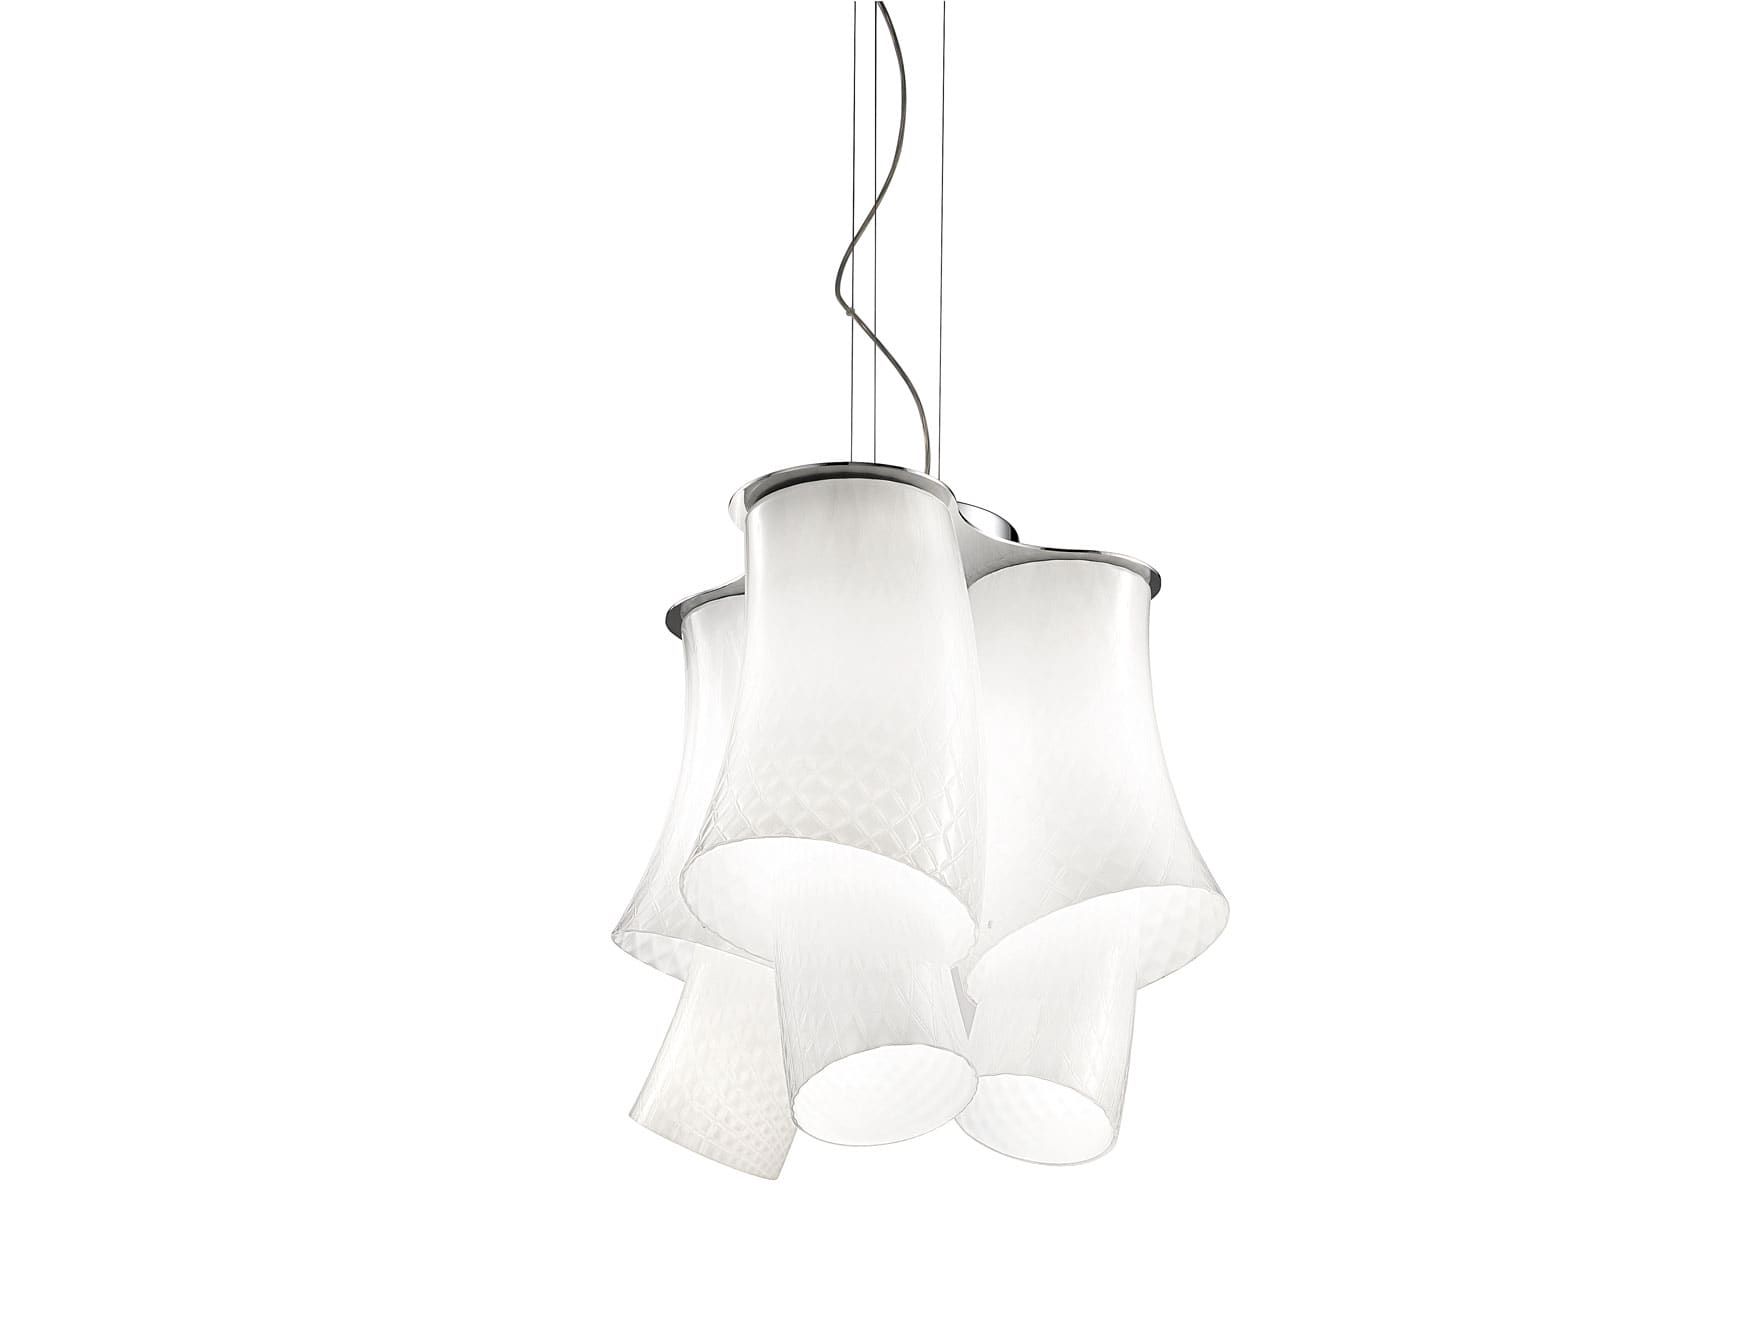 Assiba modern luxury hanging light with white glass